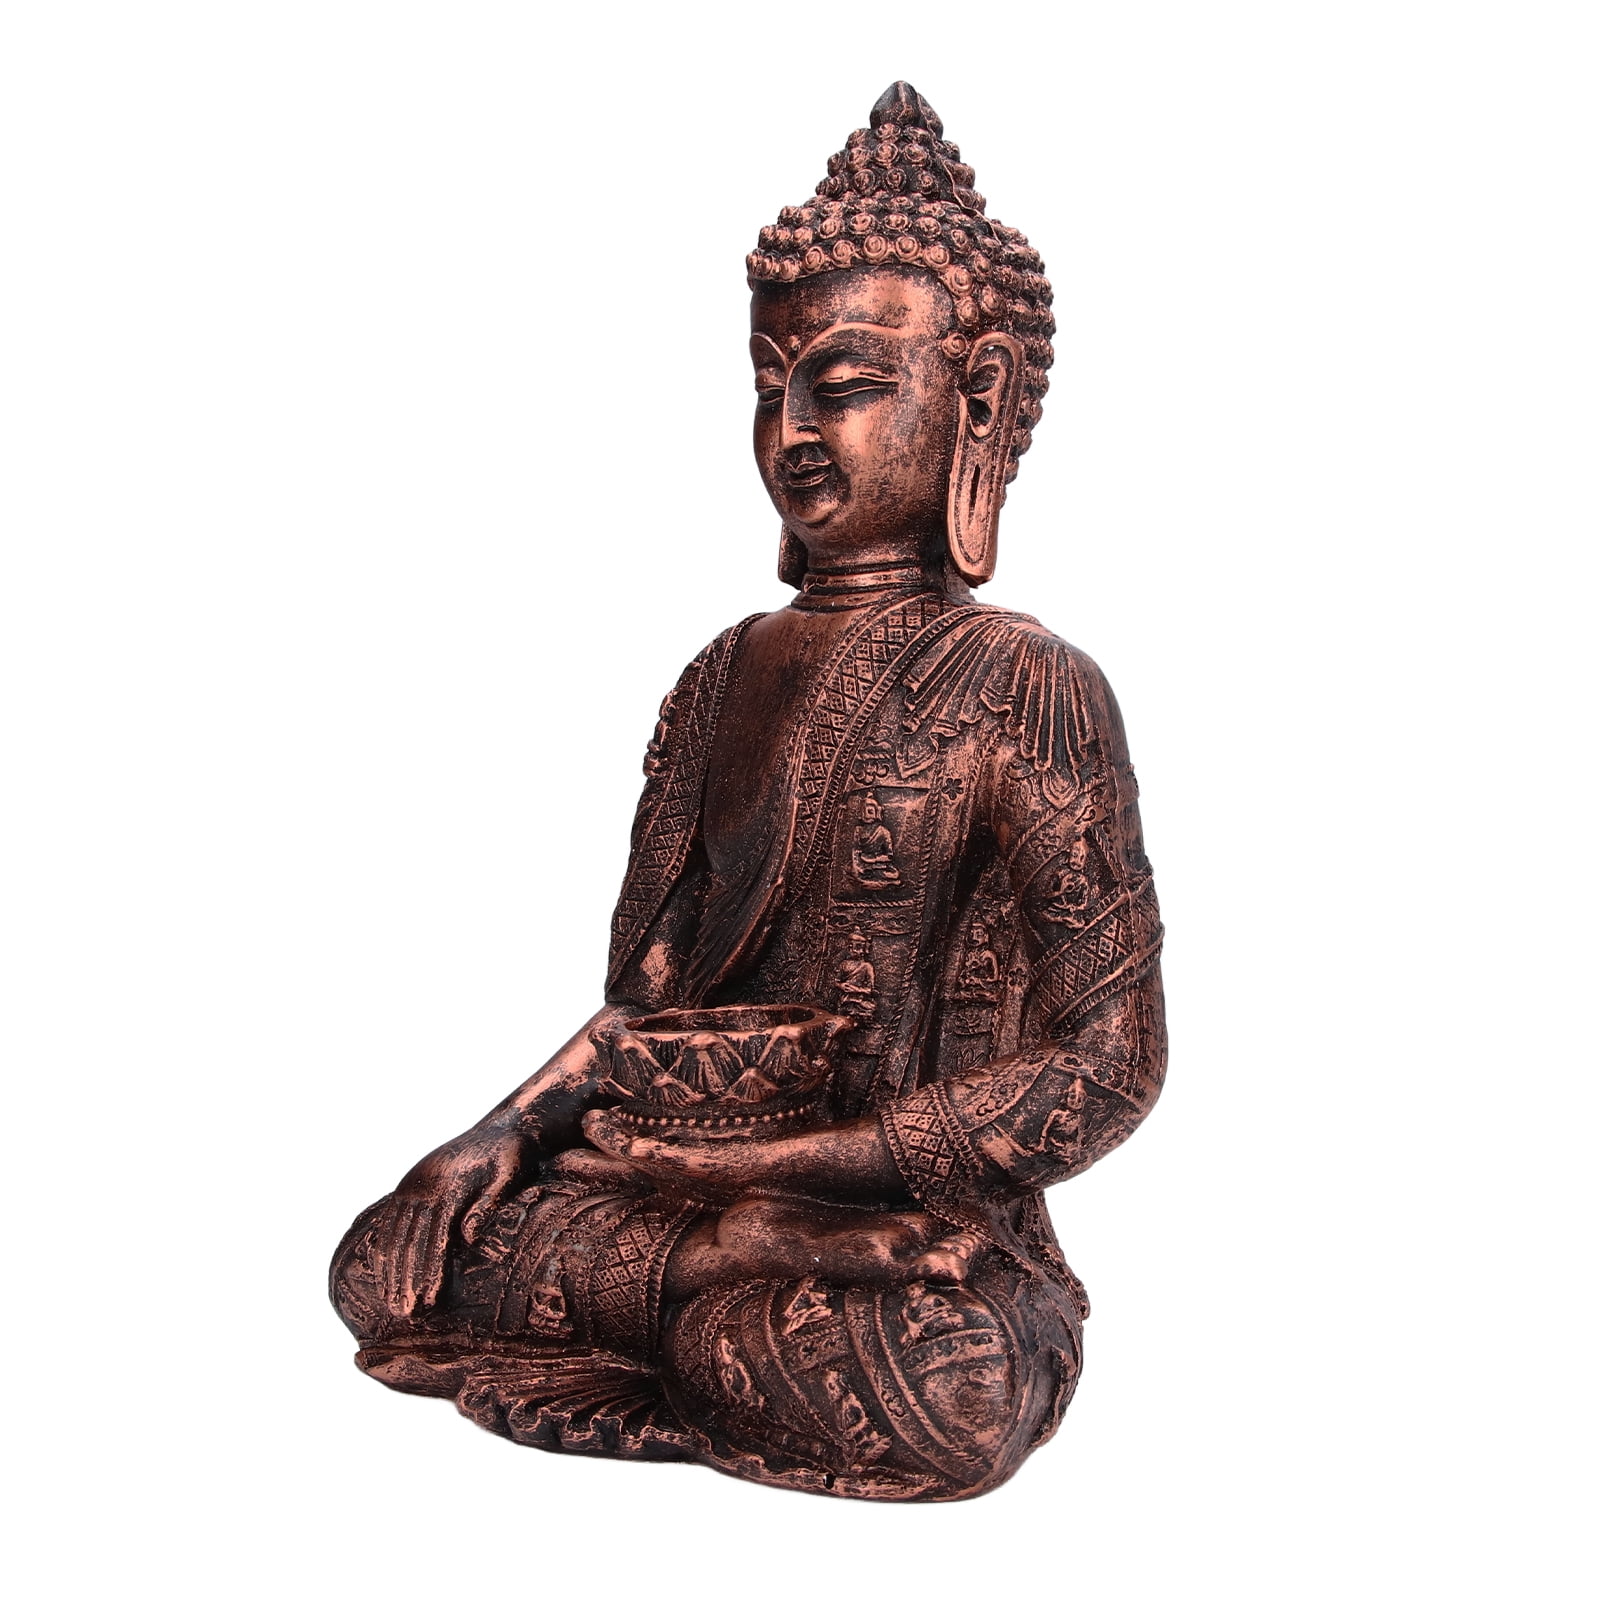 For The Home Or Garden. Divine Beautifully Detailed Thai Buddhas Head Statue 